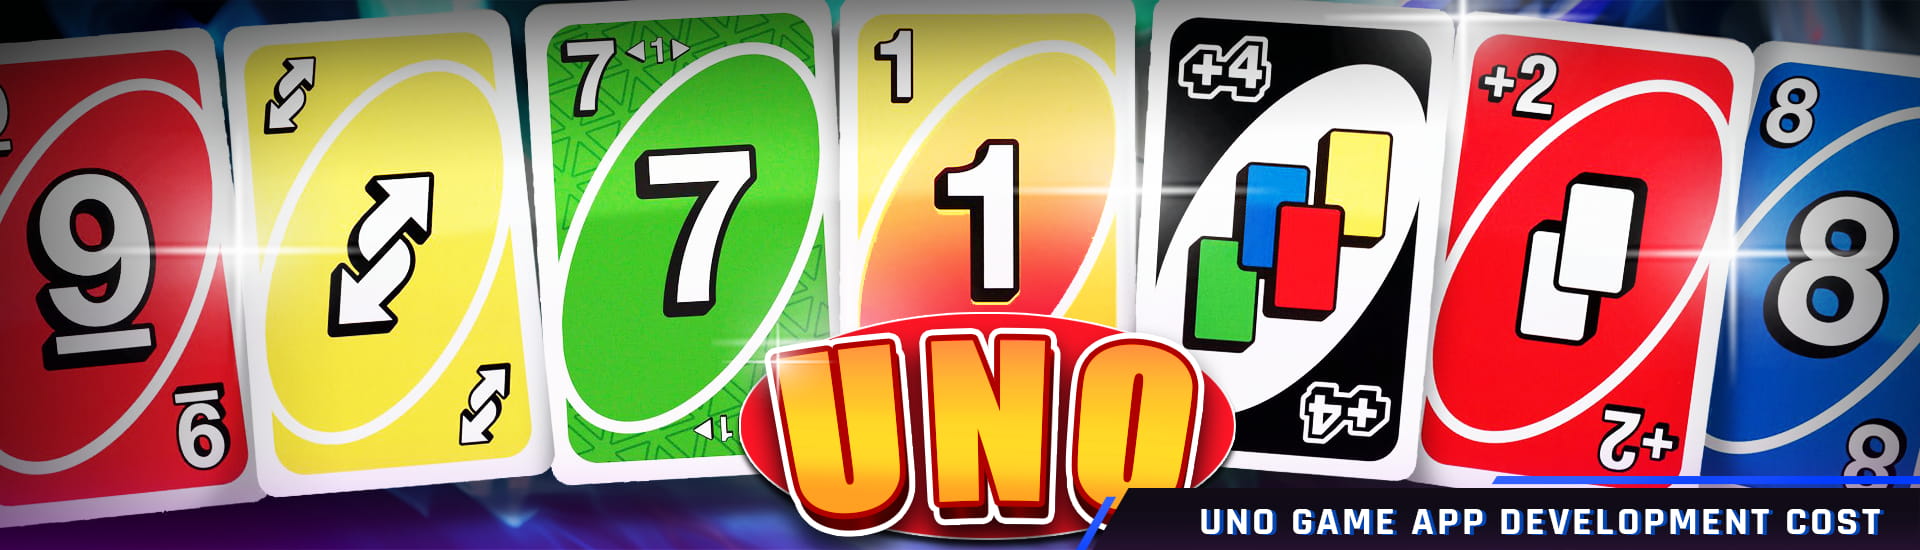 UNO! Mobile Game - UNO! IT'S A GREAT YEAR! 🎆 2023 will be full of